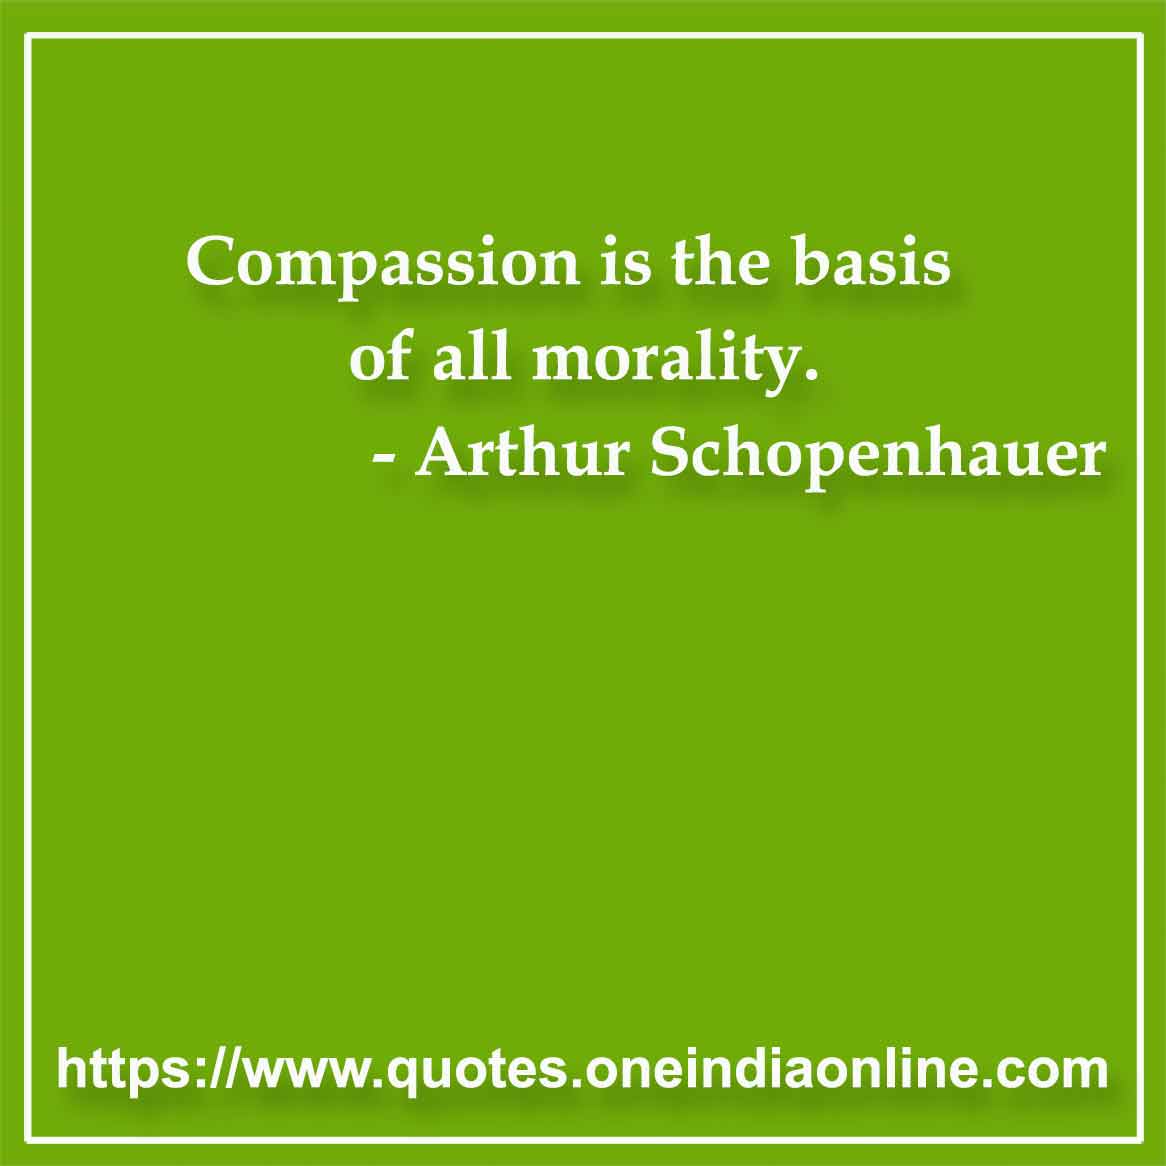 Compassion is the basis of all morality. 

- Kindness Quotes by Arthur Schopenhauer